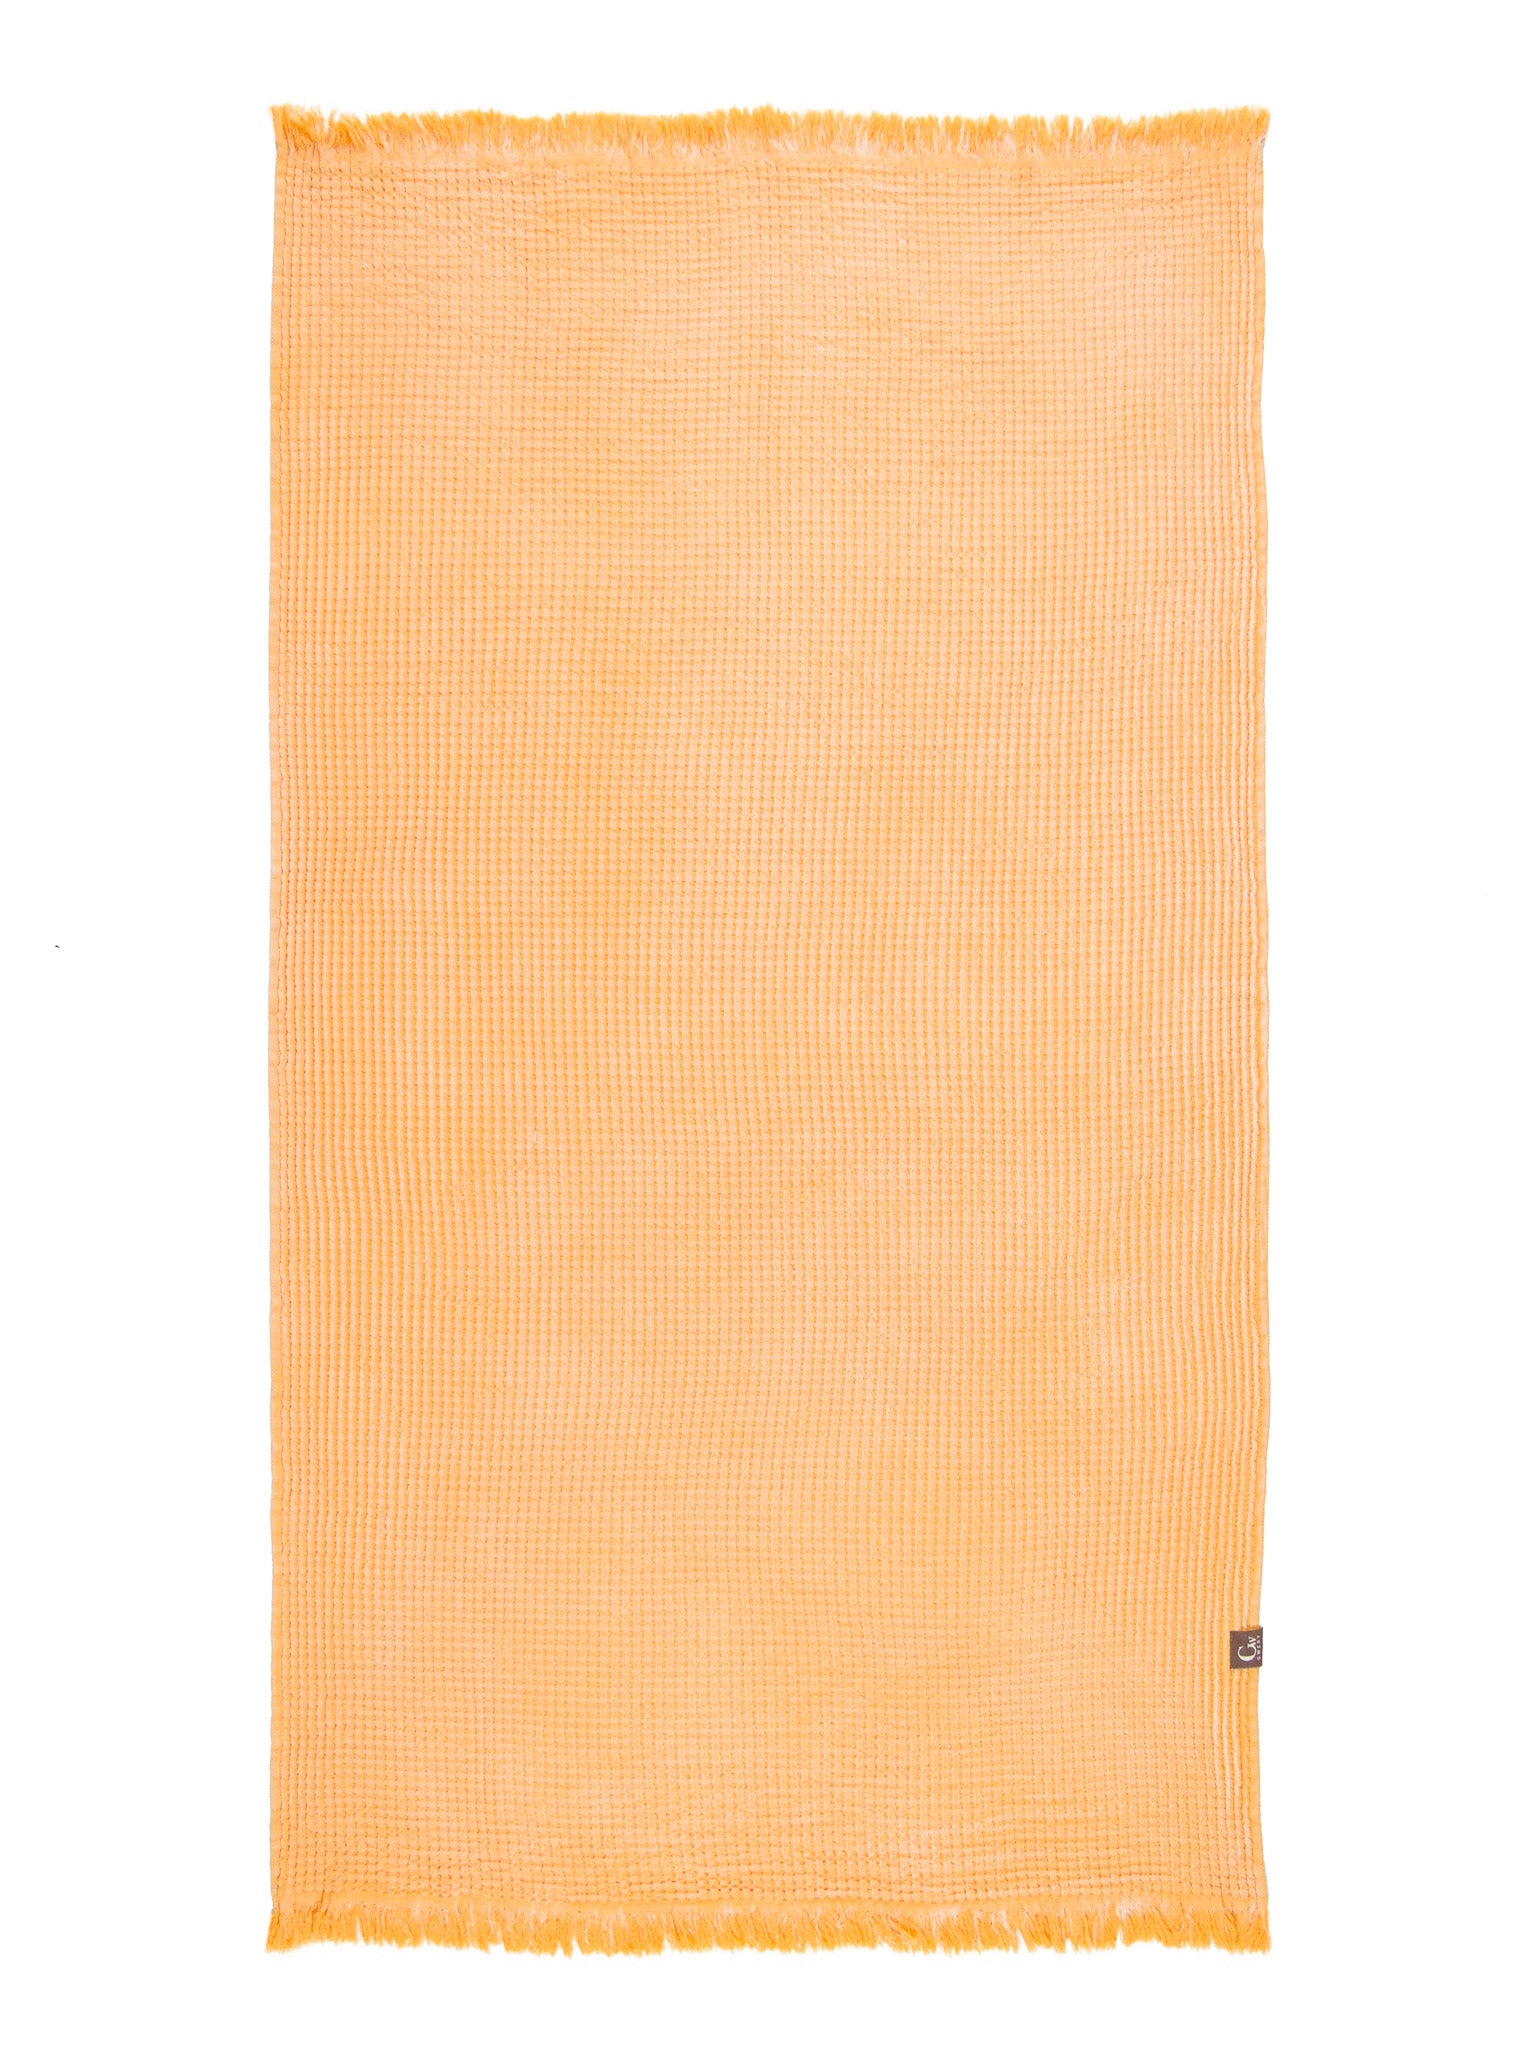 Yellow double sided honeycomb beach towel open up